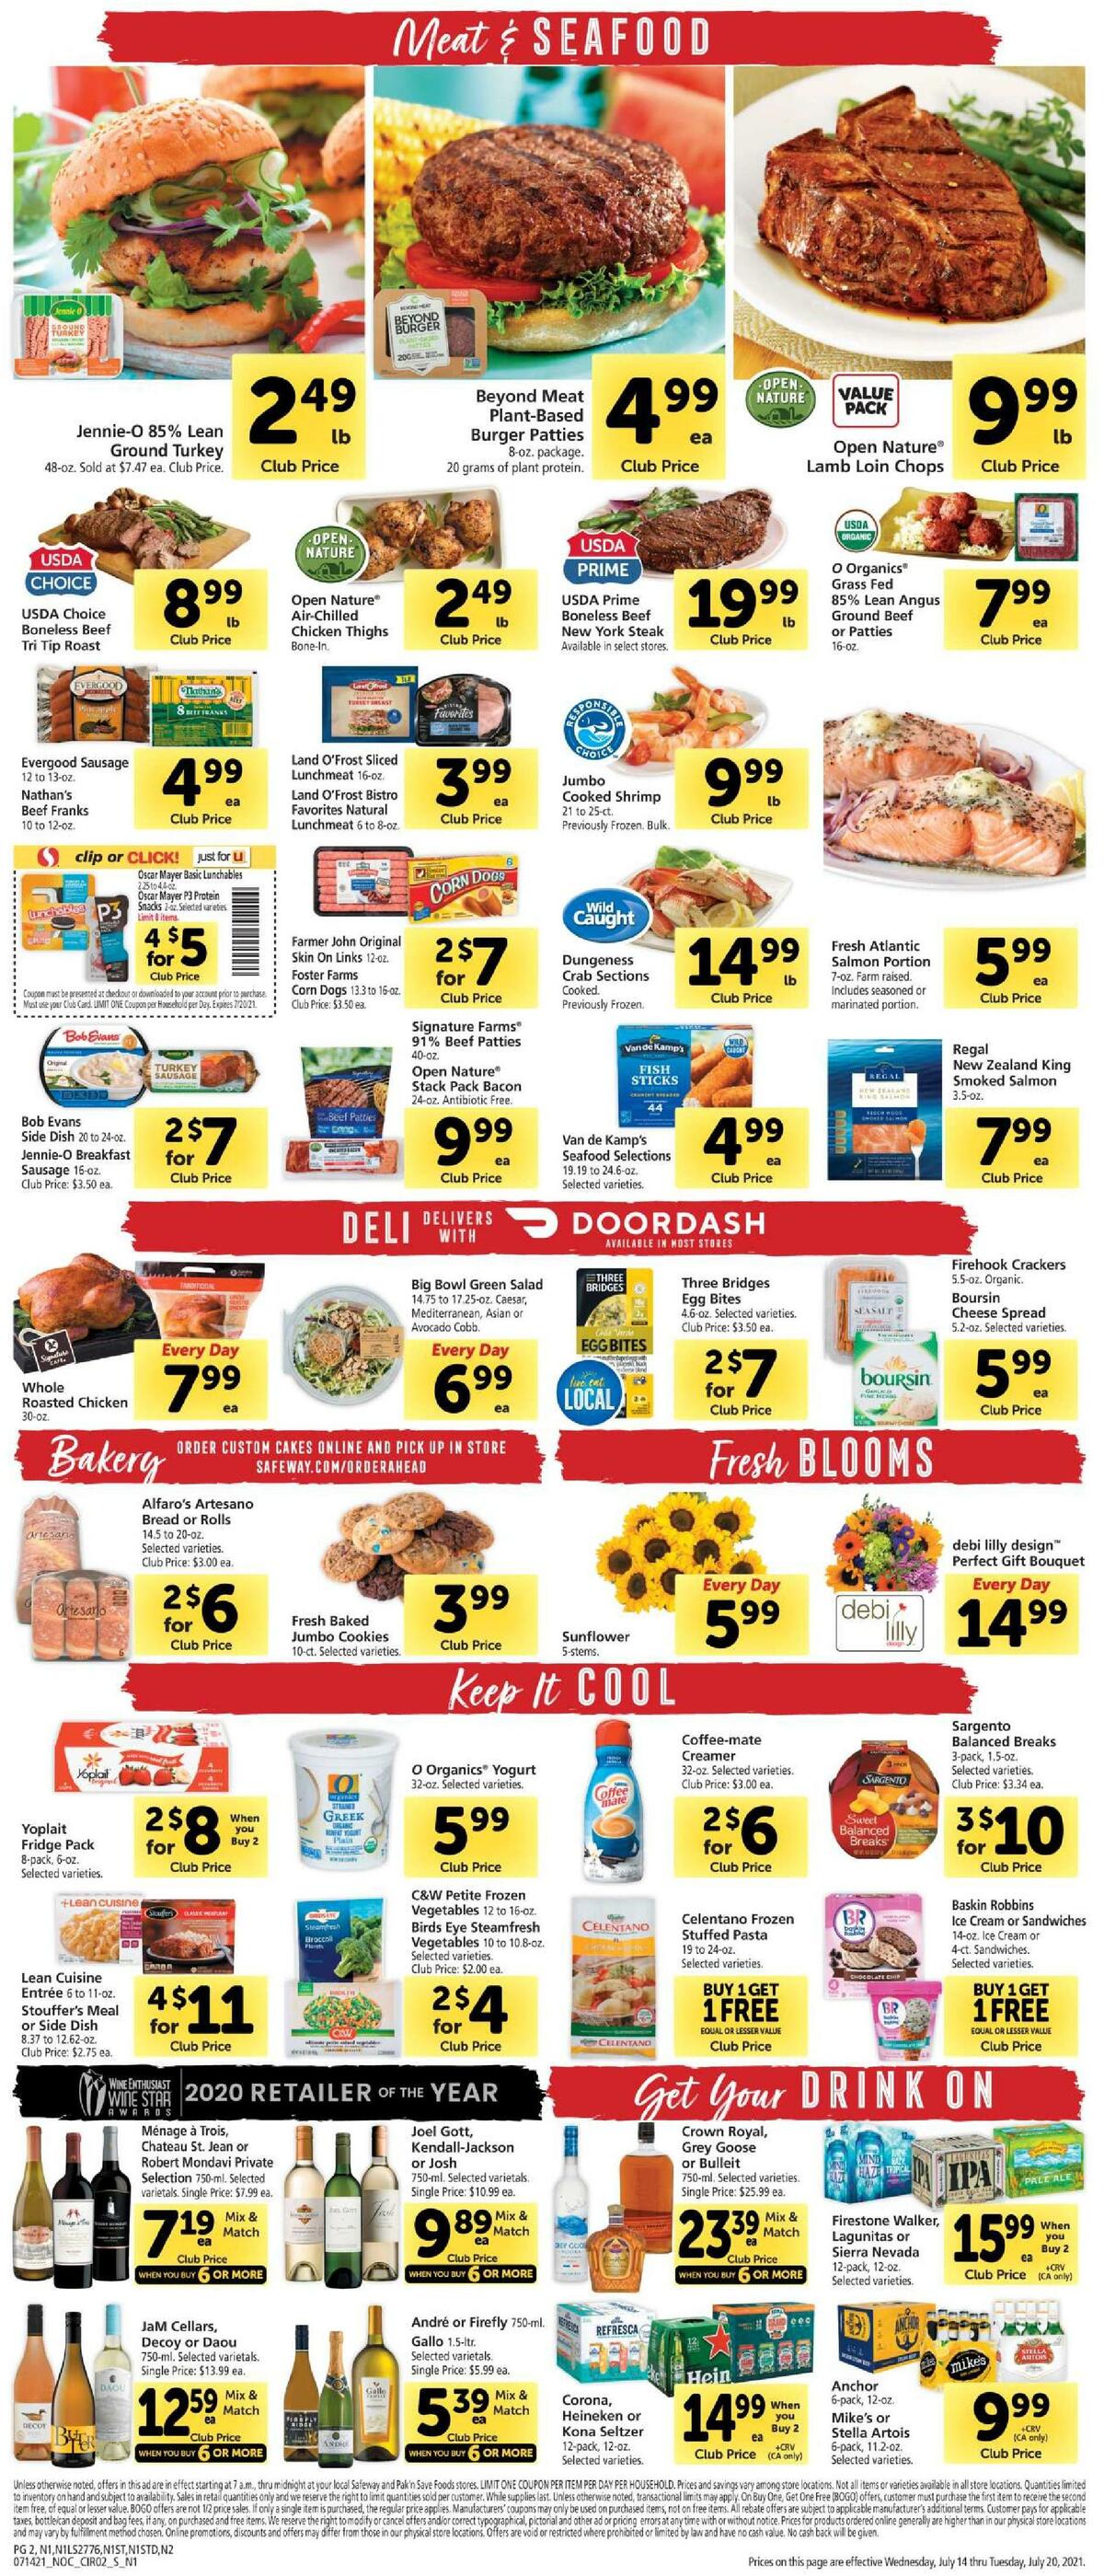 Safeway Weekly Ad from July 14